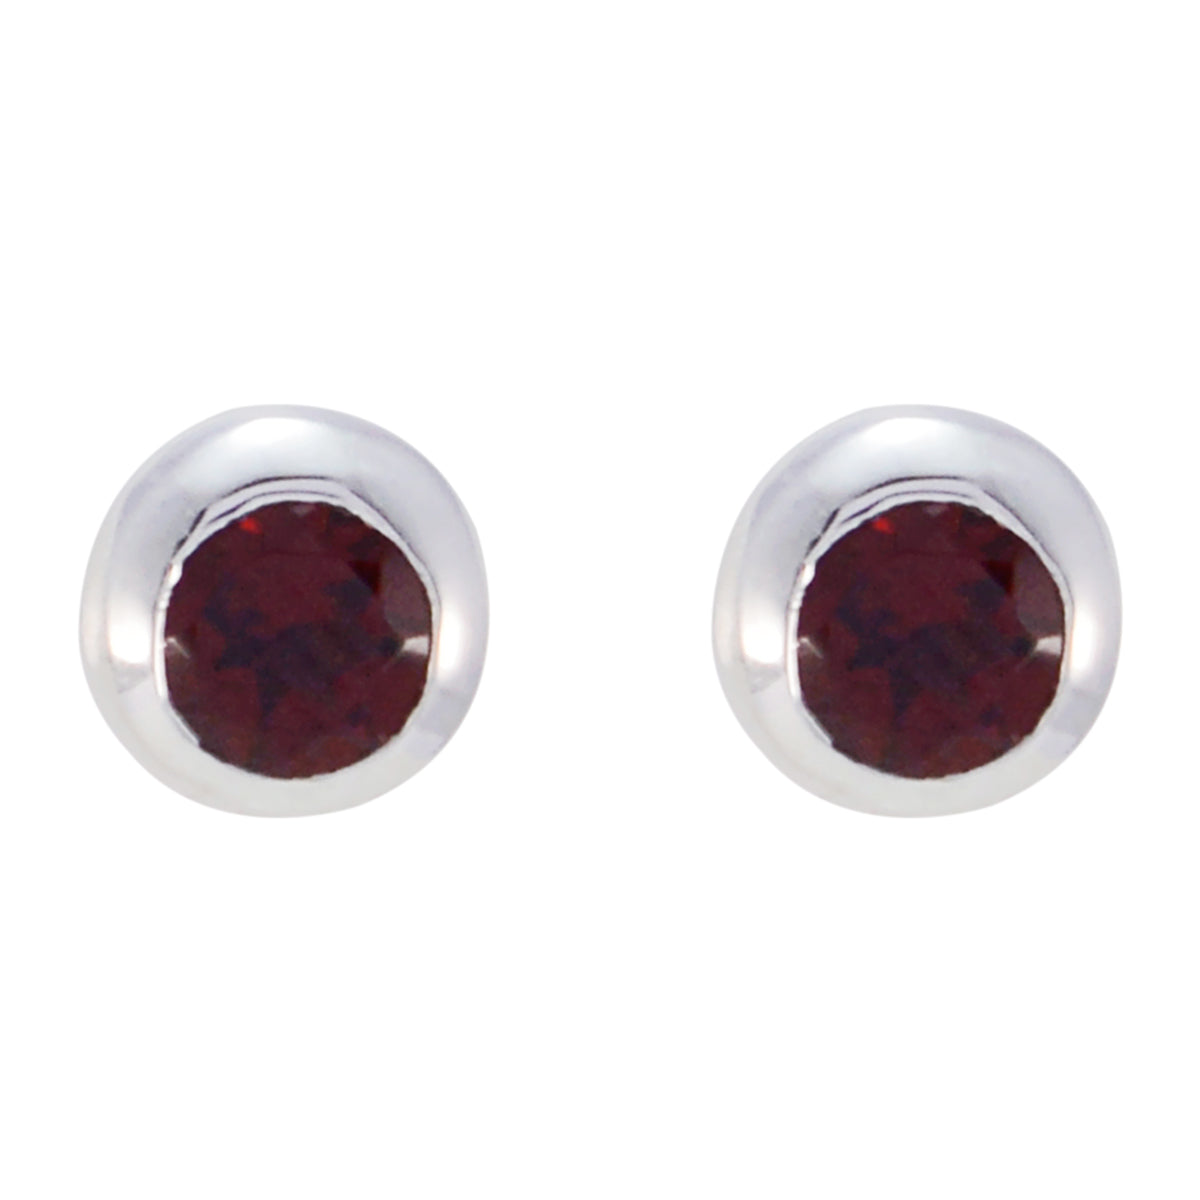 Riyo Good Gemstones round Faceted Red Garnet Silver Earring gift for mothers day